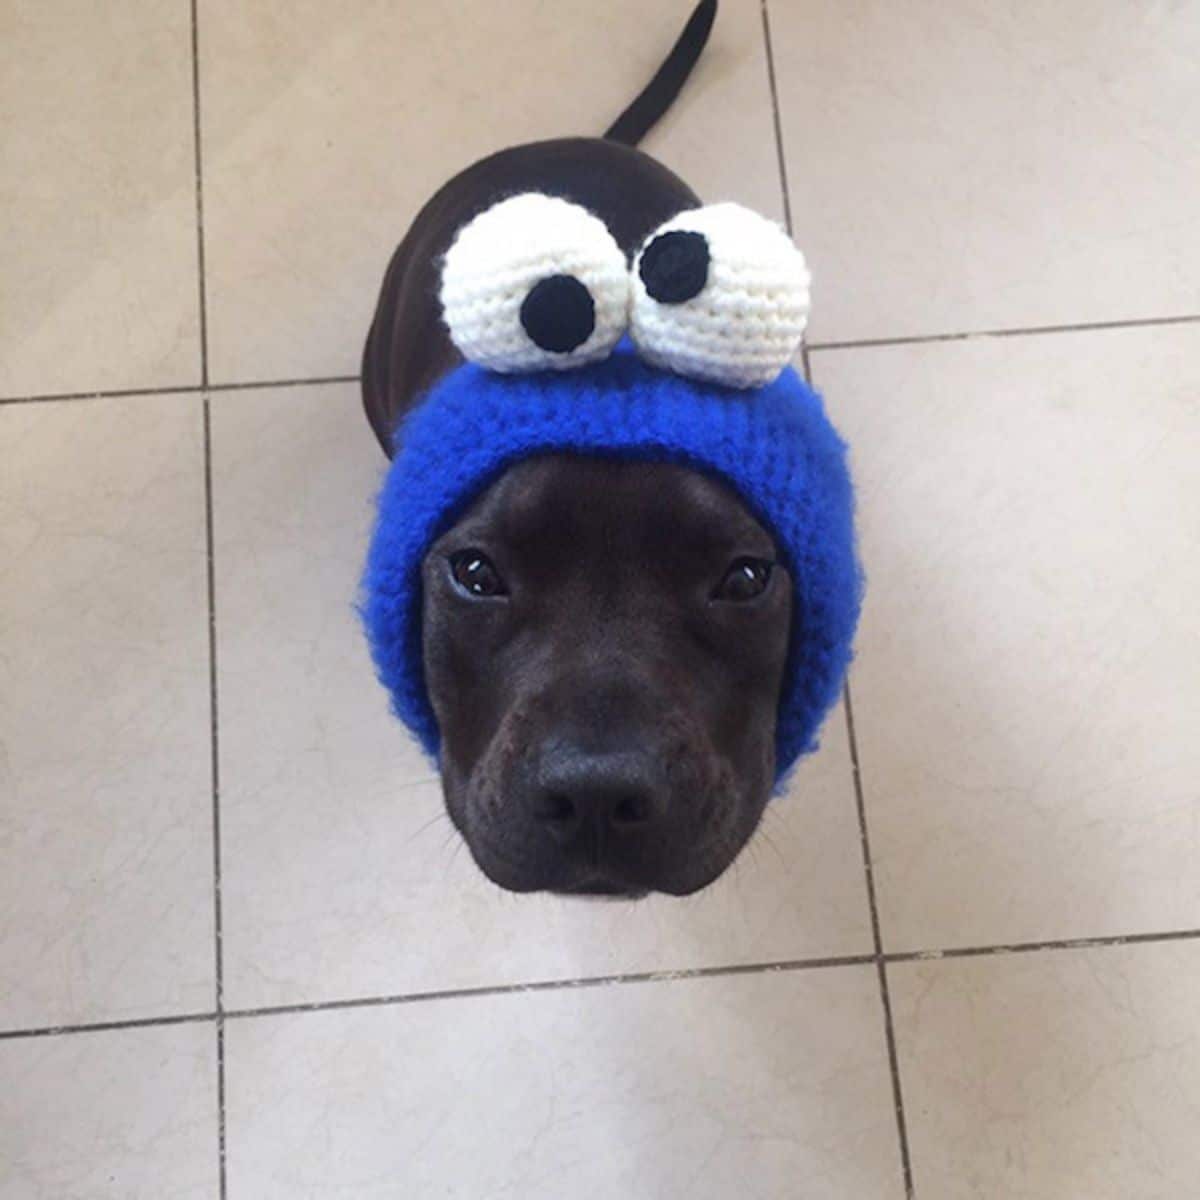 black puppy wearing blue crocheted headband with 2 giant white and black eyes on top